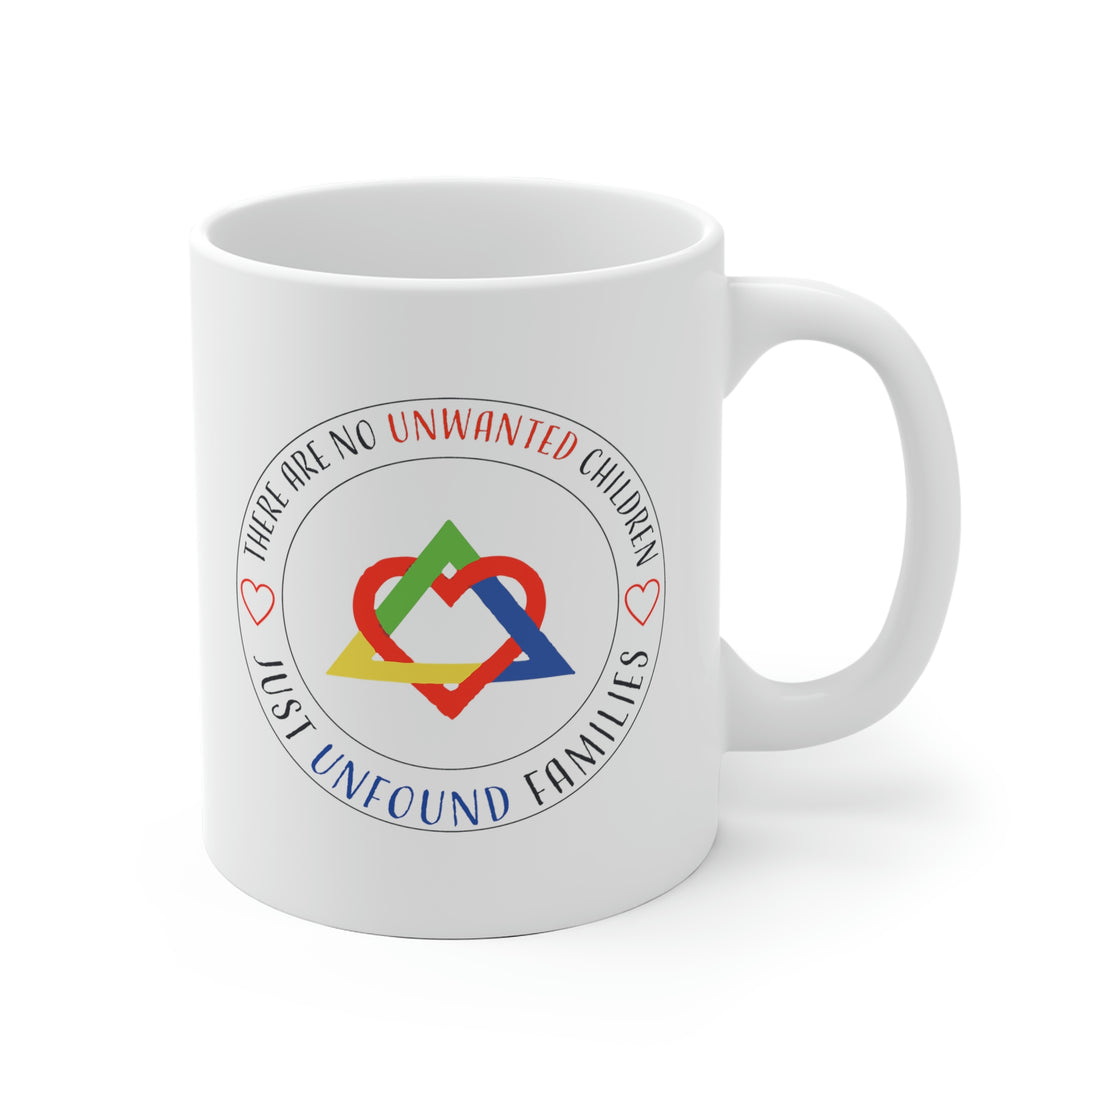 There are No Unwanted Children Only Unfound Families - White Ceramic Mug 2 sizes Available